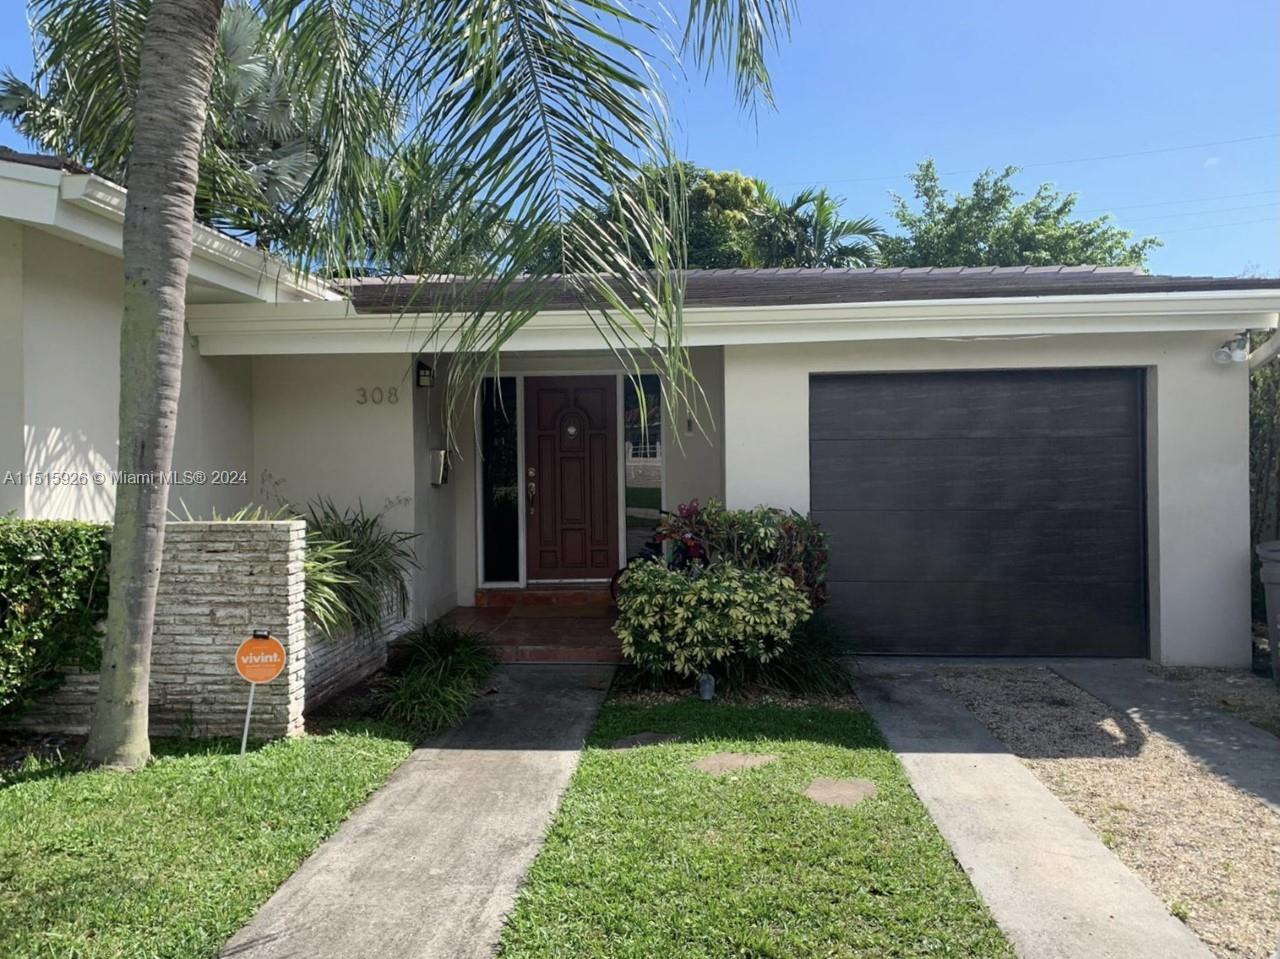 Photo of 308 Cadima Ave in Coral Gables, FL